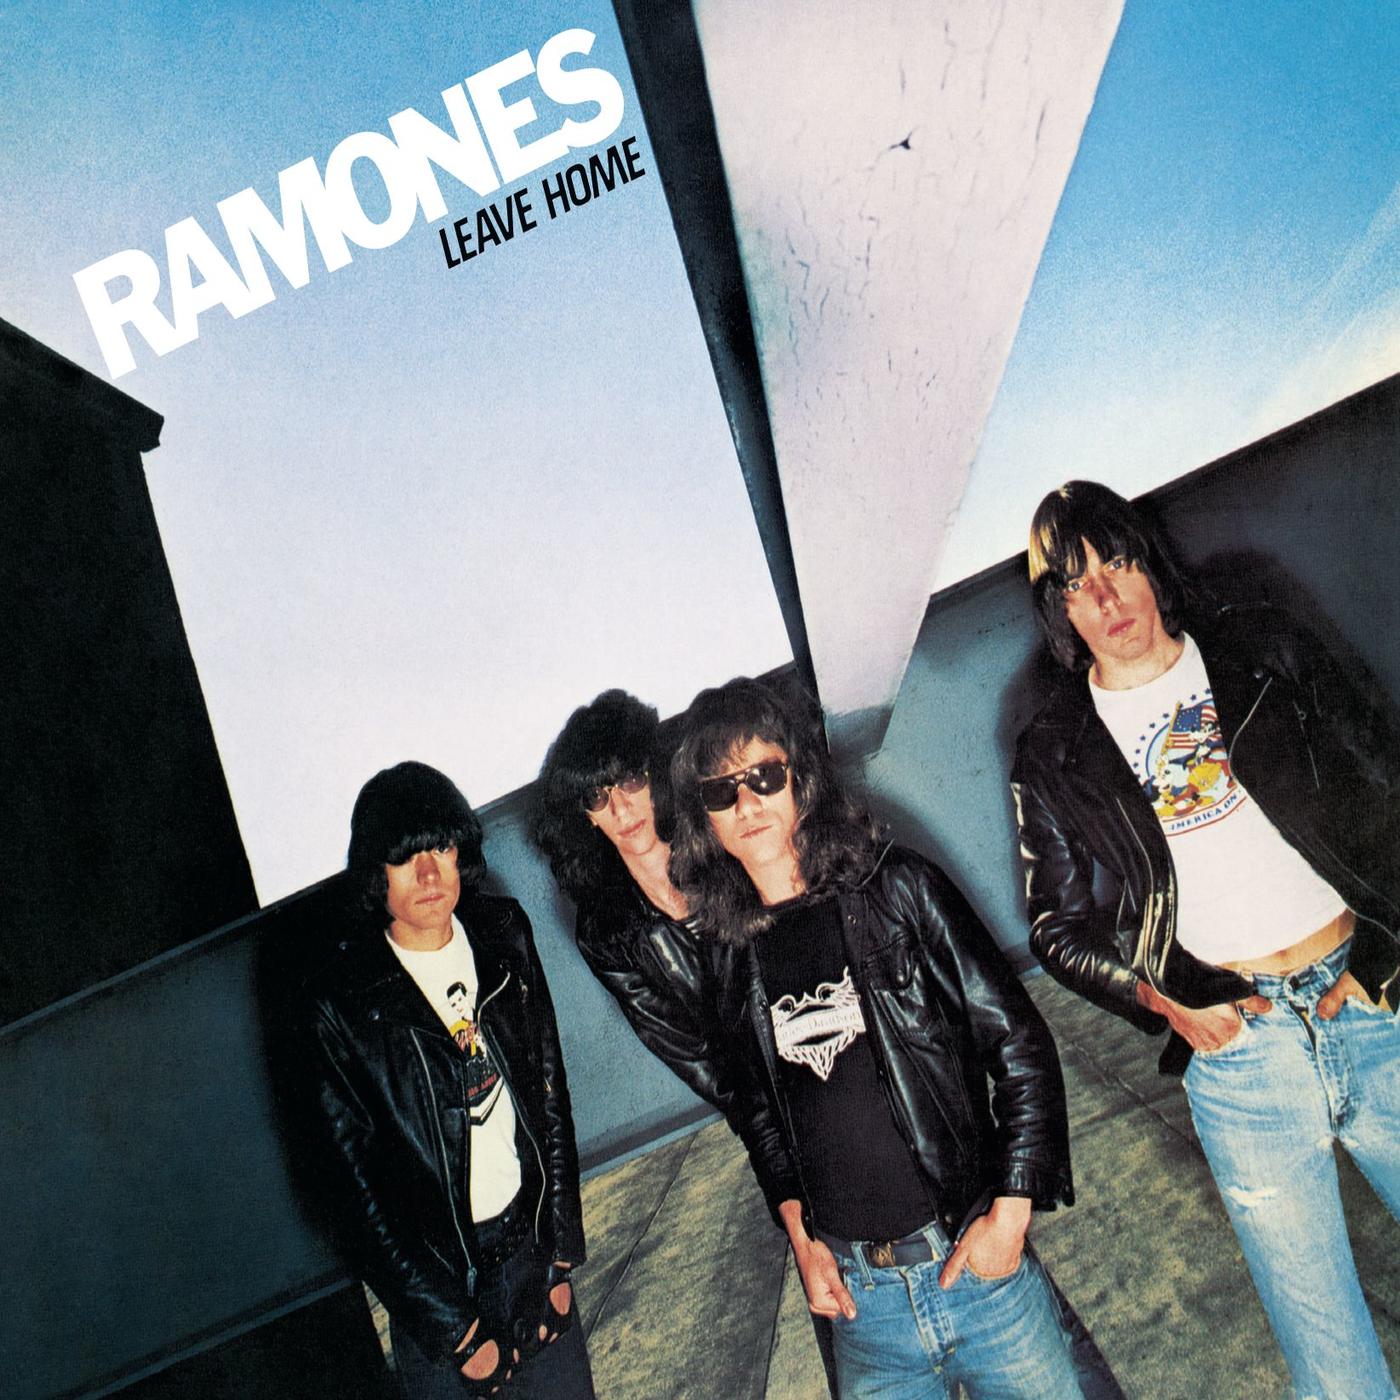 Ramones - "Leave Home" LP (remastered)